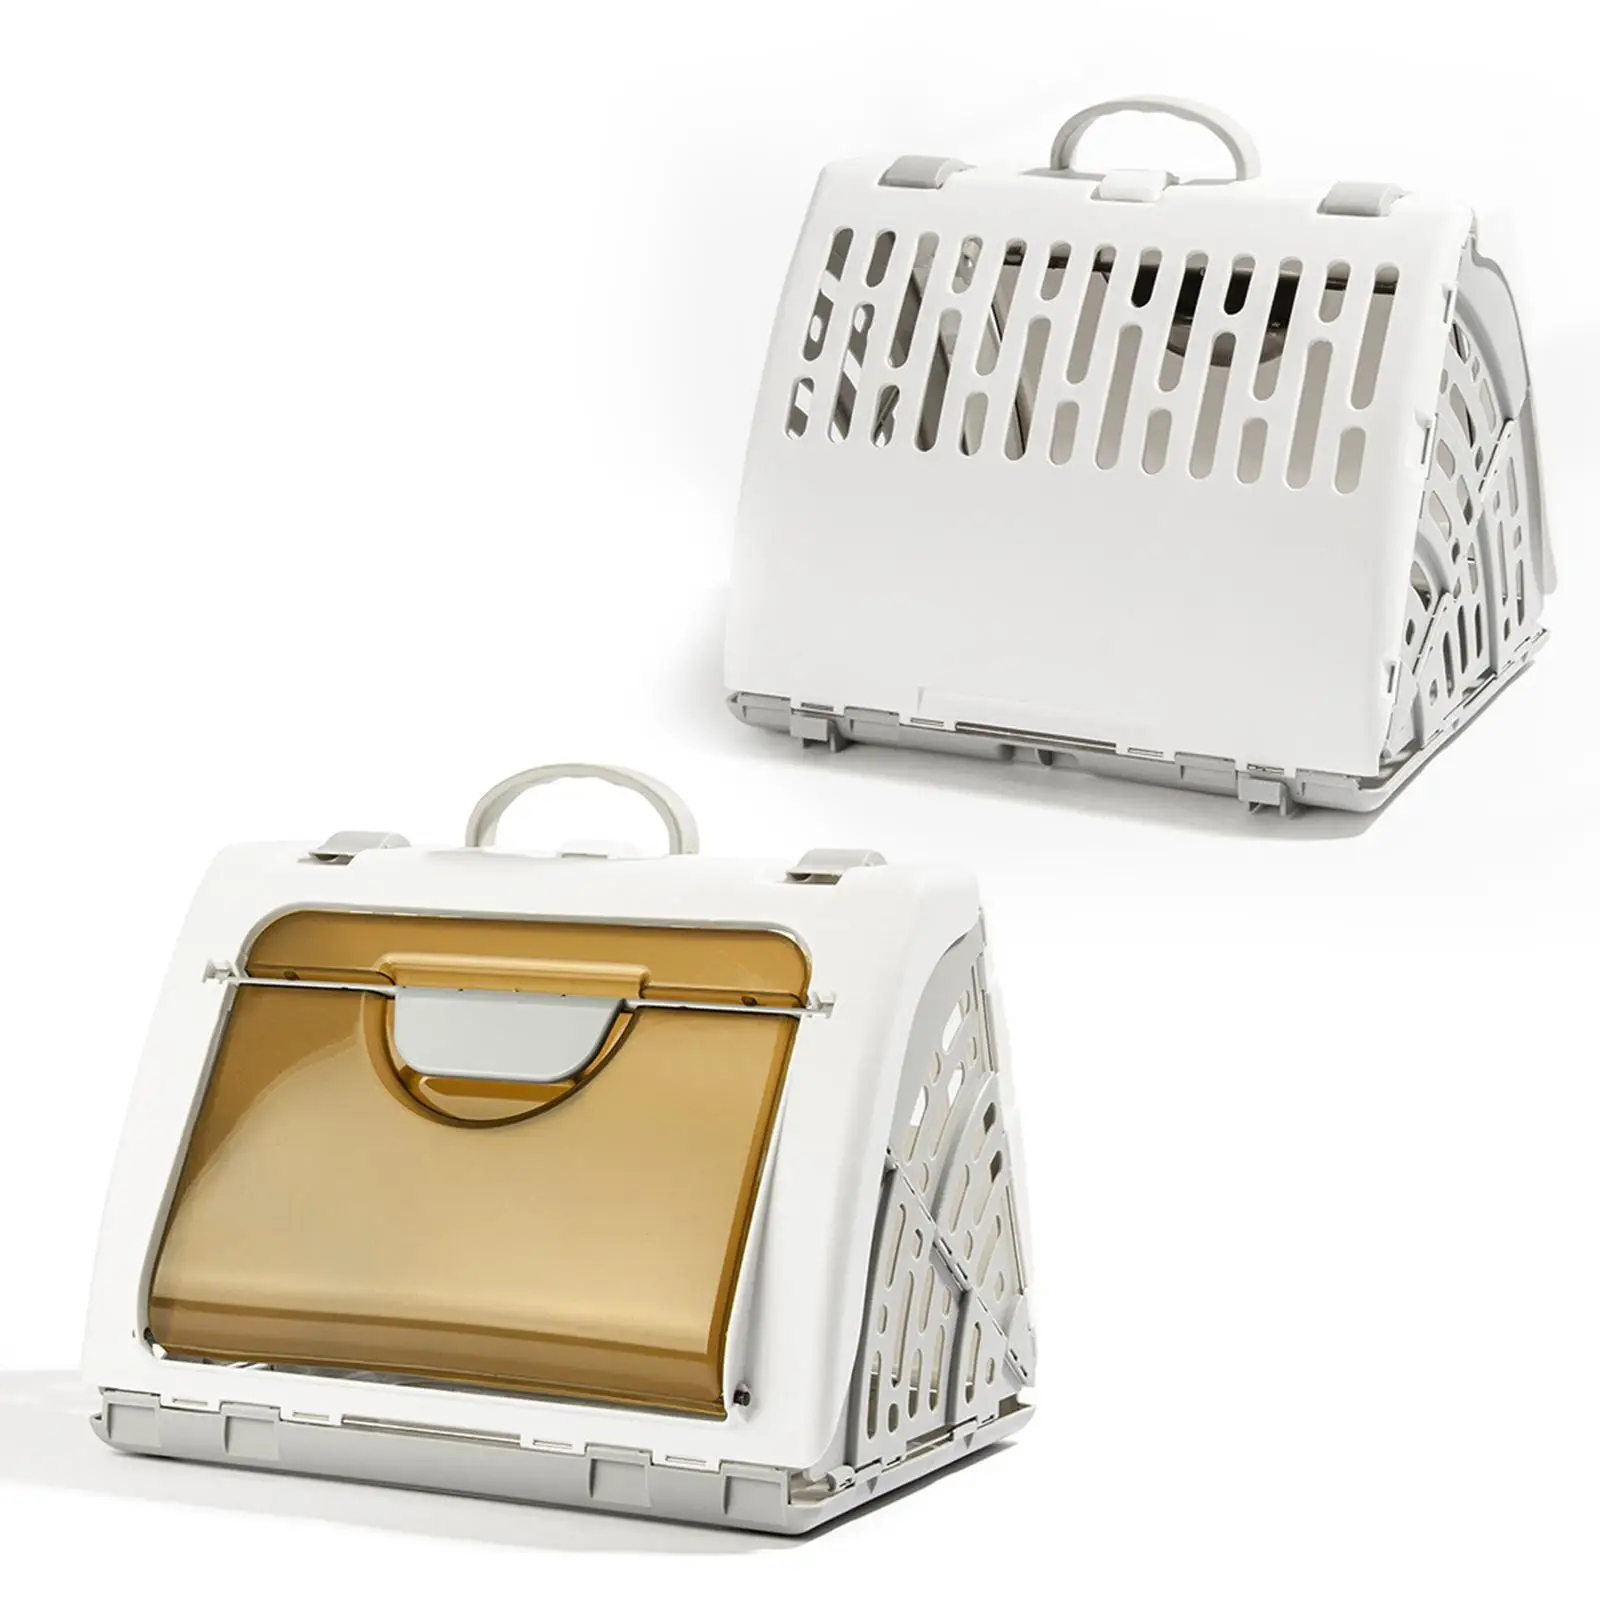 Foldable Pet Cat Carrier Dog Travel Bag Carrying Case Portable for Pets Grooming Shopping